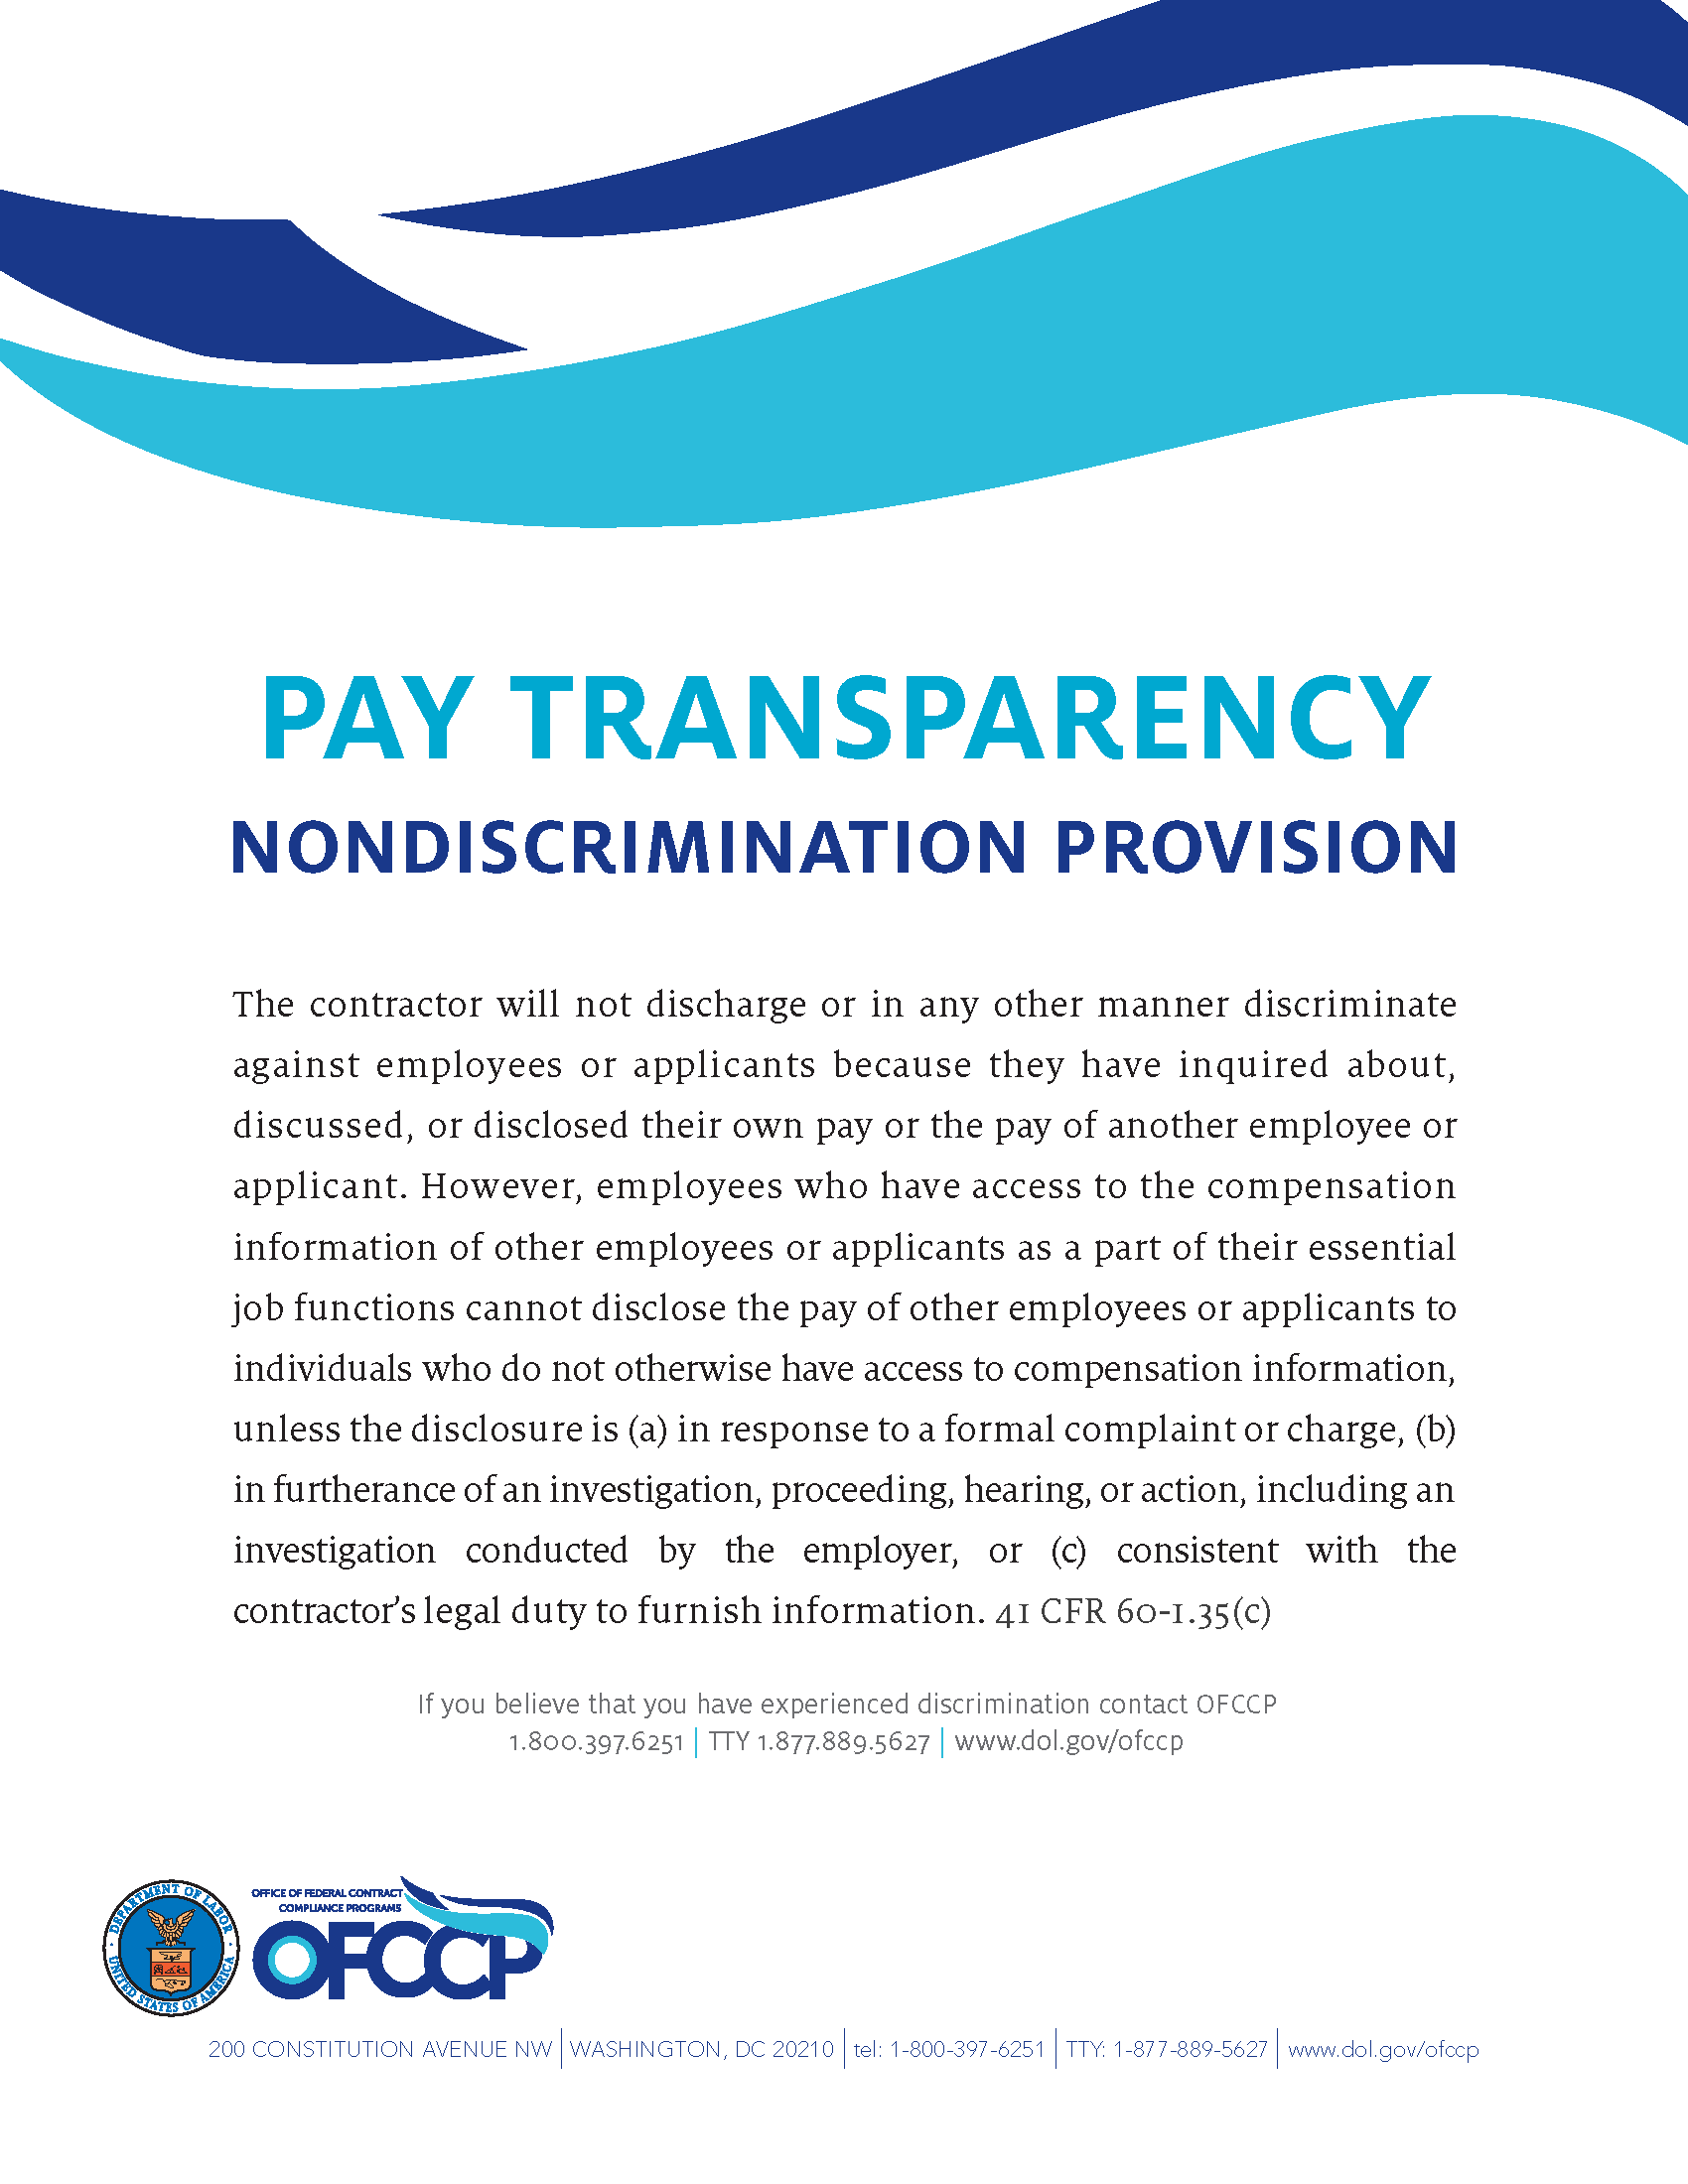 Pay Transparency flier